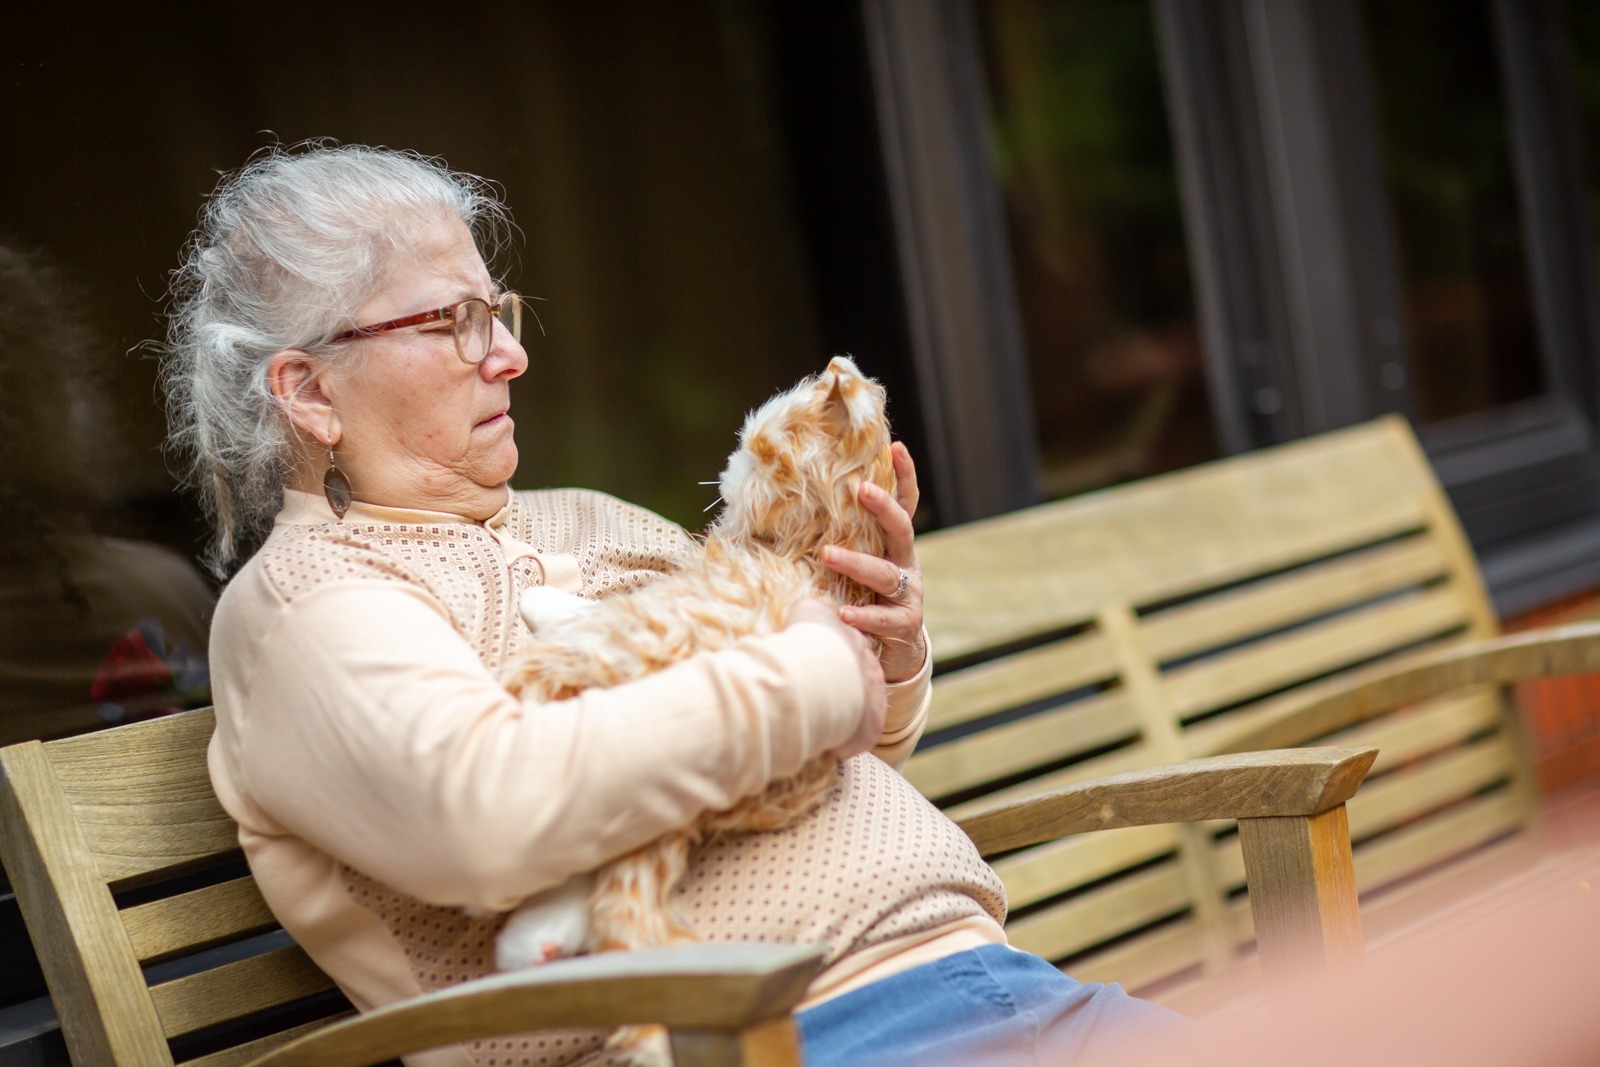 Gail holds an orange robotic cat and looks at her quizzically